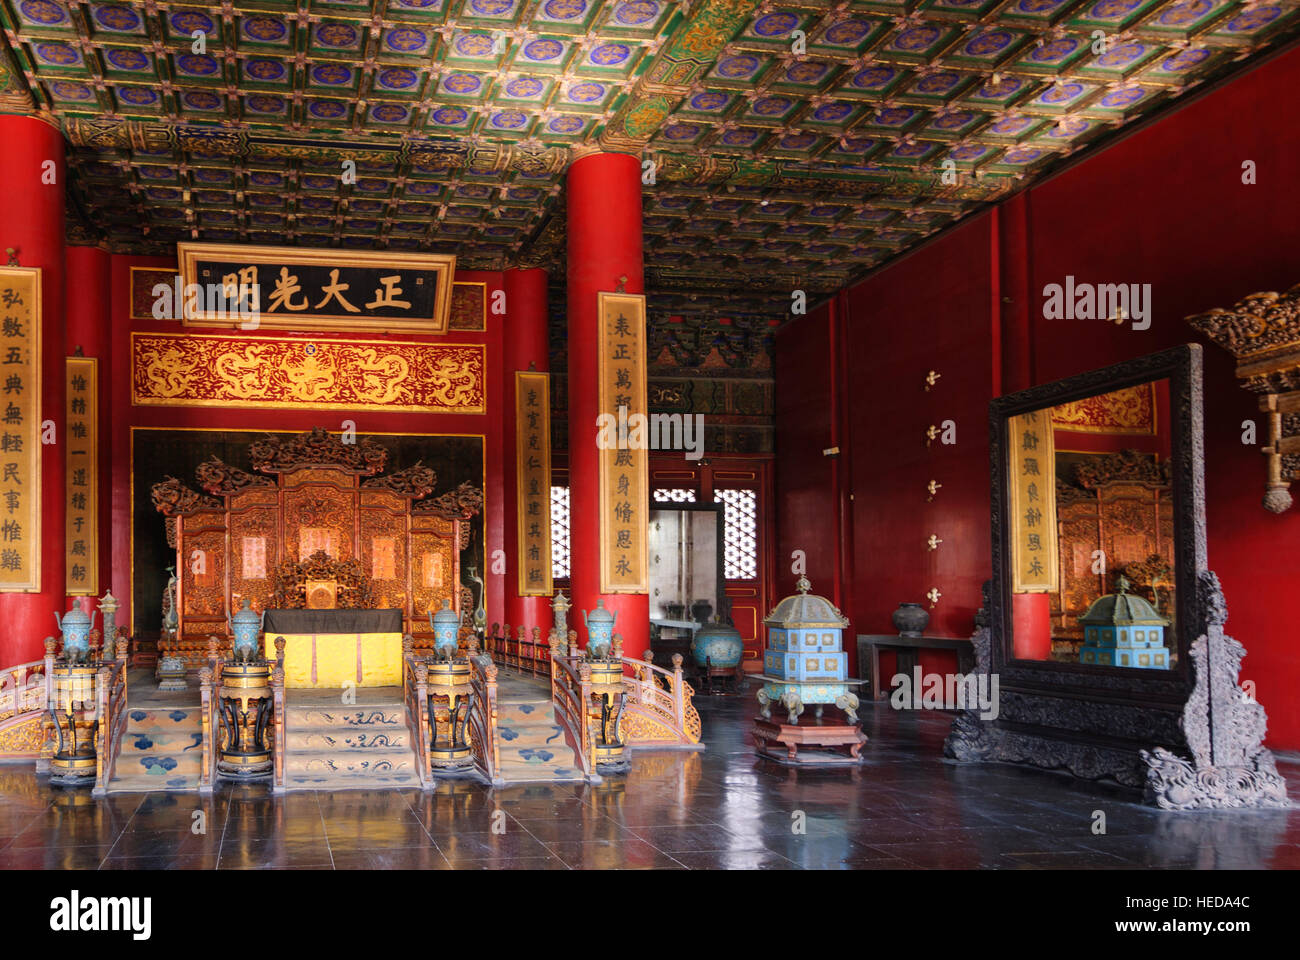 Peking: Forbidden City (Imperial Palace); Palace of Heavenly Purity with imperial throne, tablet in Chinese scripture over the throne 'Loyalty and Cla Stock Photo